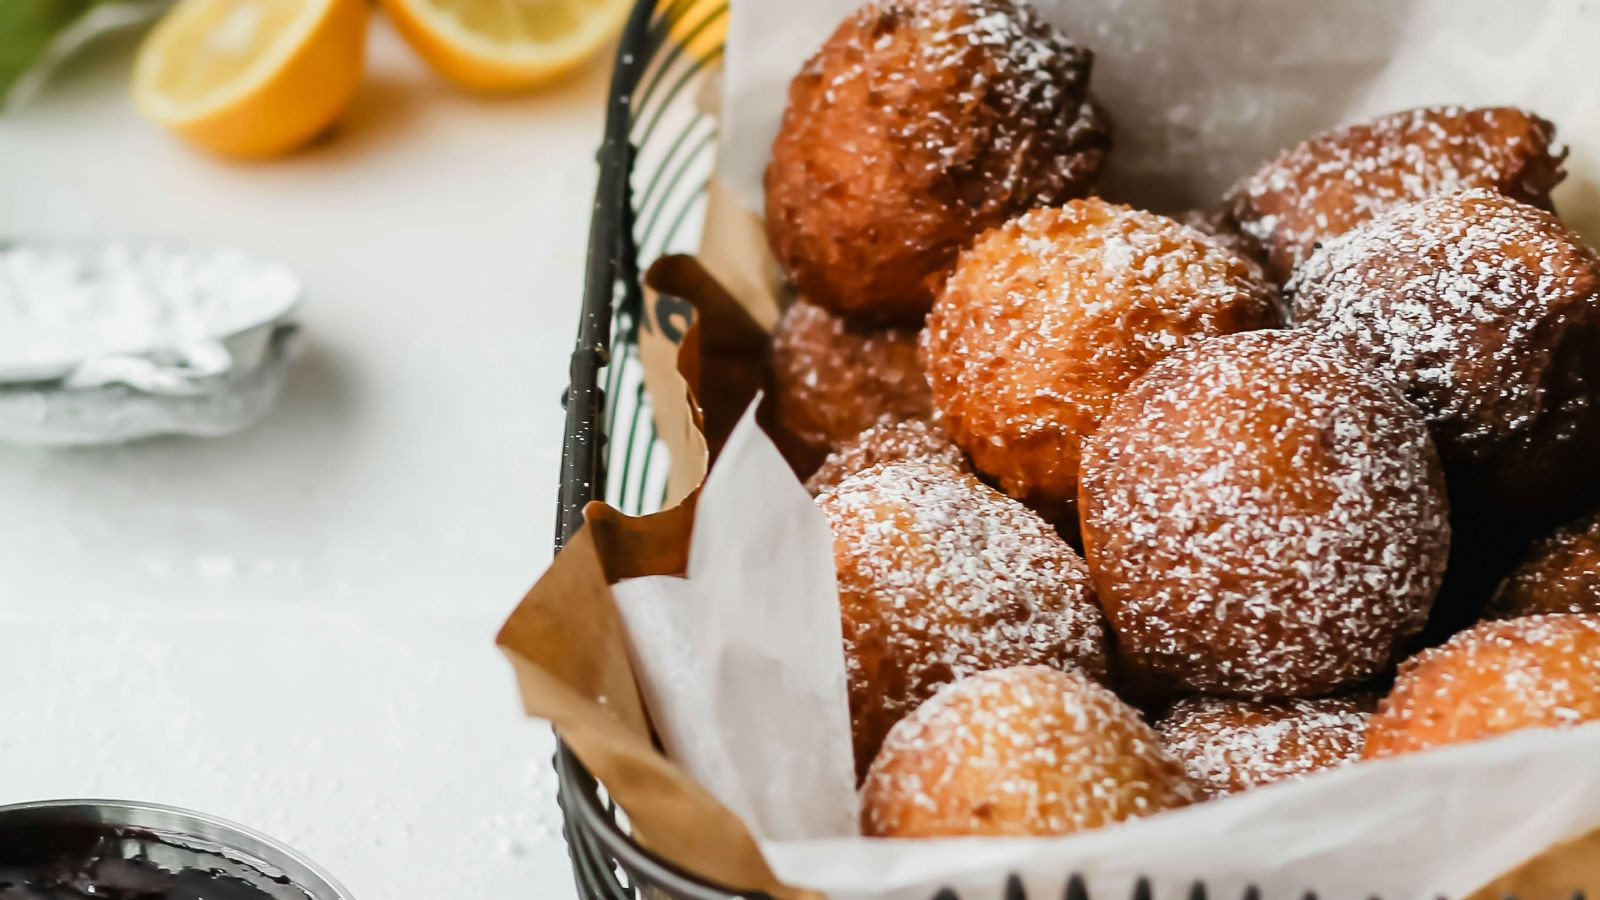 Traditional Hanukkah Desserts Lovely I Know that Sufganiyot — Jelly Donuts — are Traditional